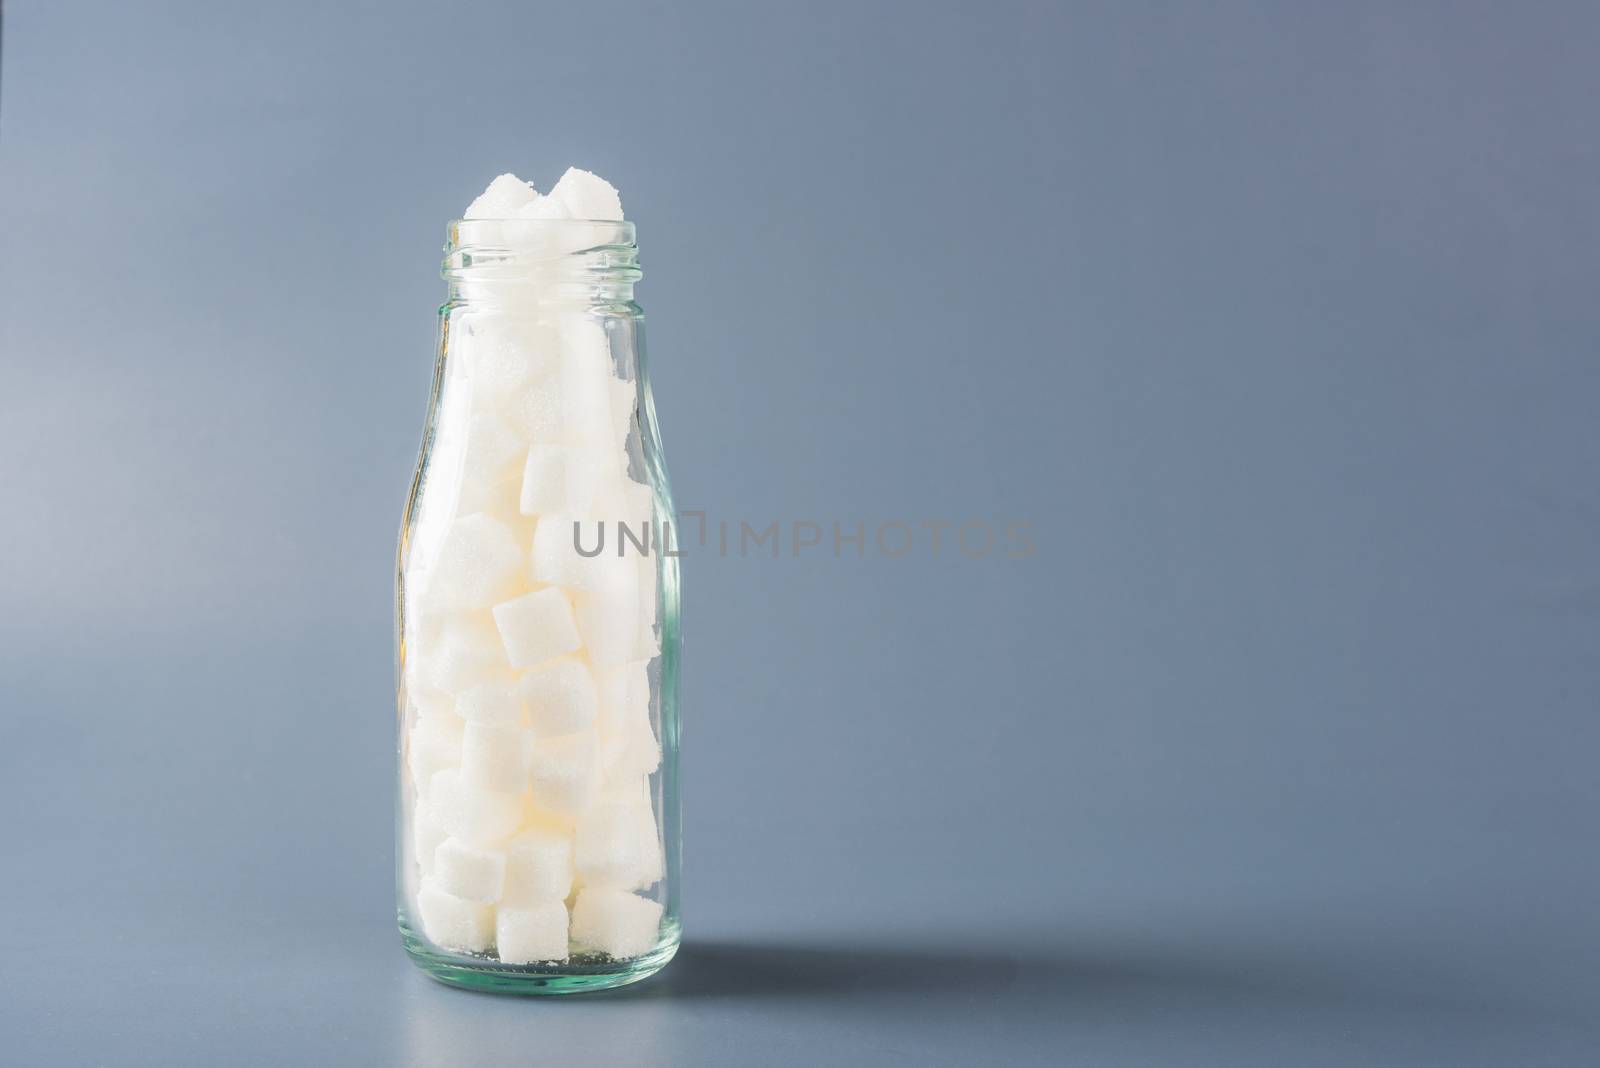 Glass bottle full of white sugar cube sweet food ingredient, studio shot isolated on gray background, health high blood risk of diabetes and calorie intake concept and unhealthy drink